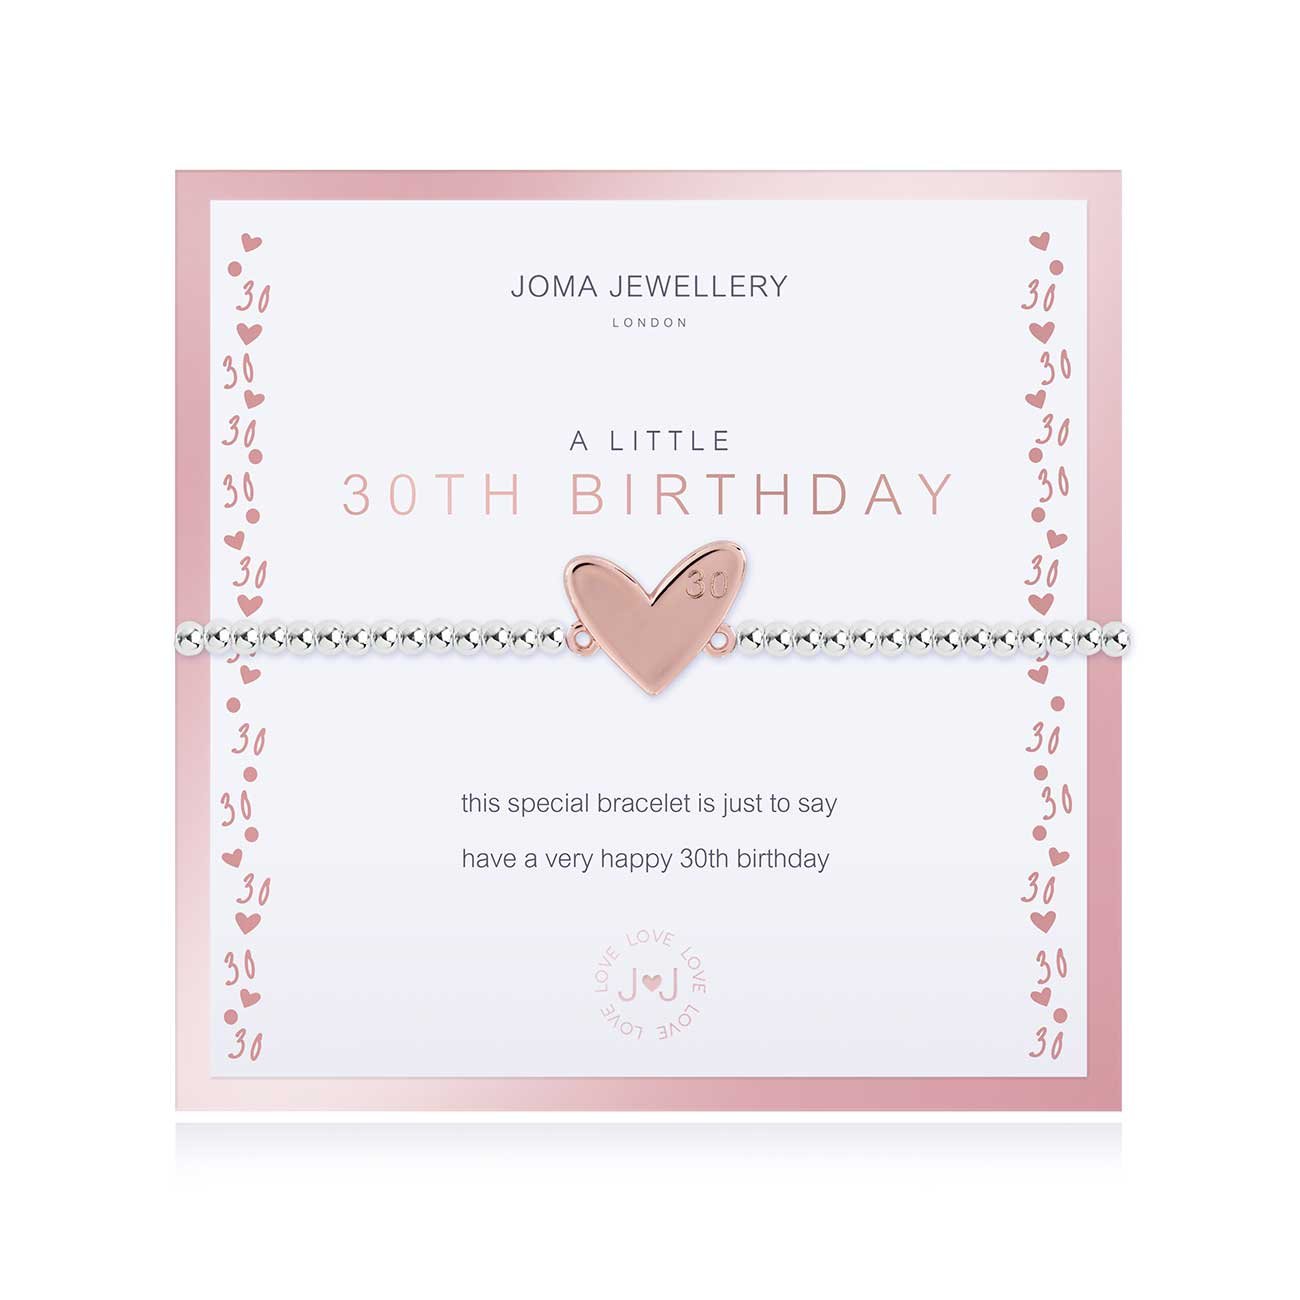 Joma Jewellery Boxed a little 30th Birthday